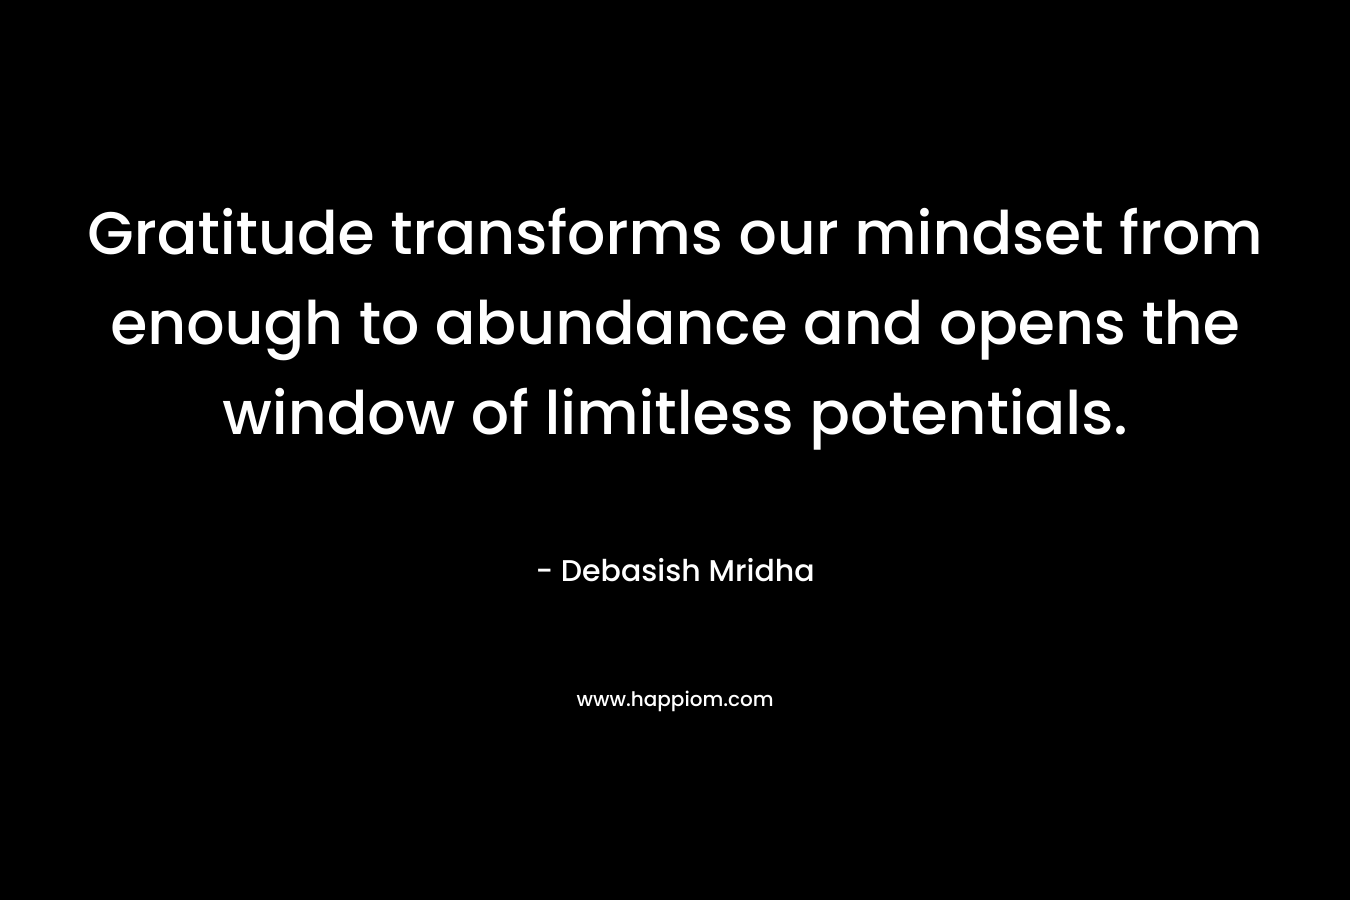 Gratitude transforms our mindset from enough to abundance and opens the window of limitless potentials.